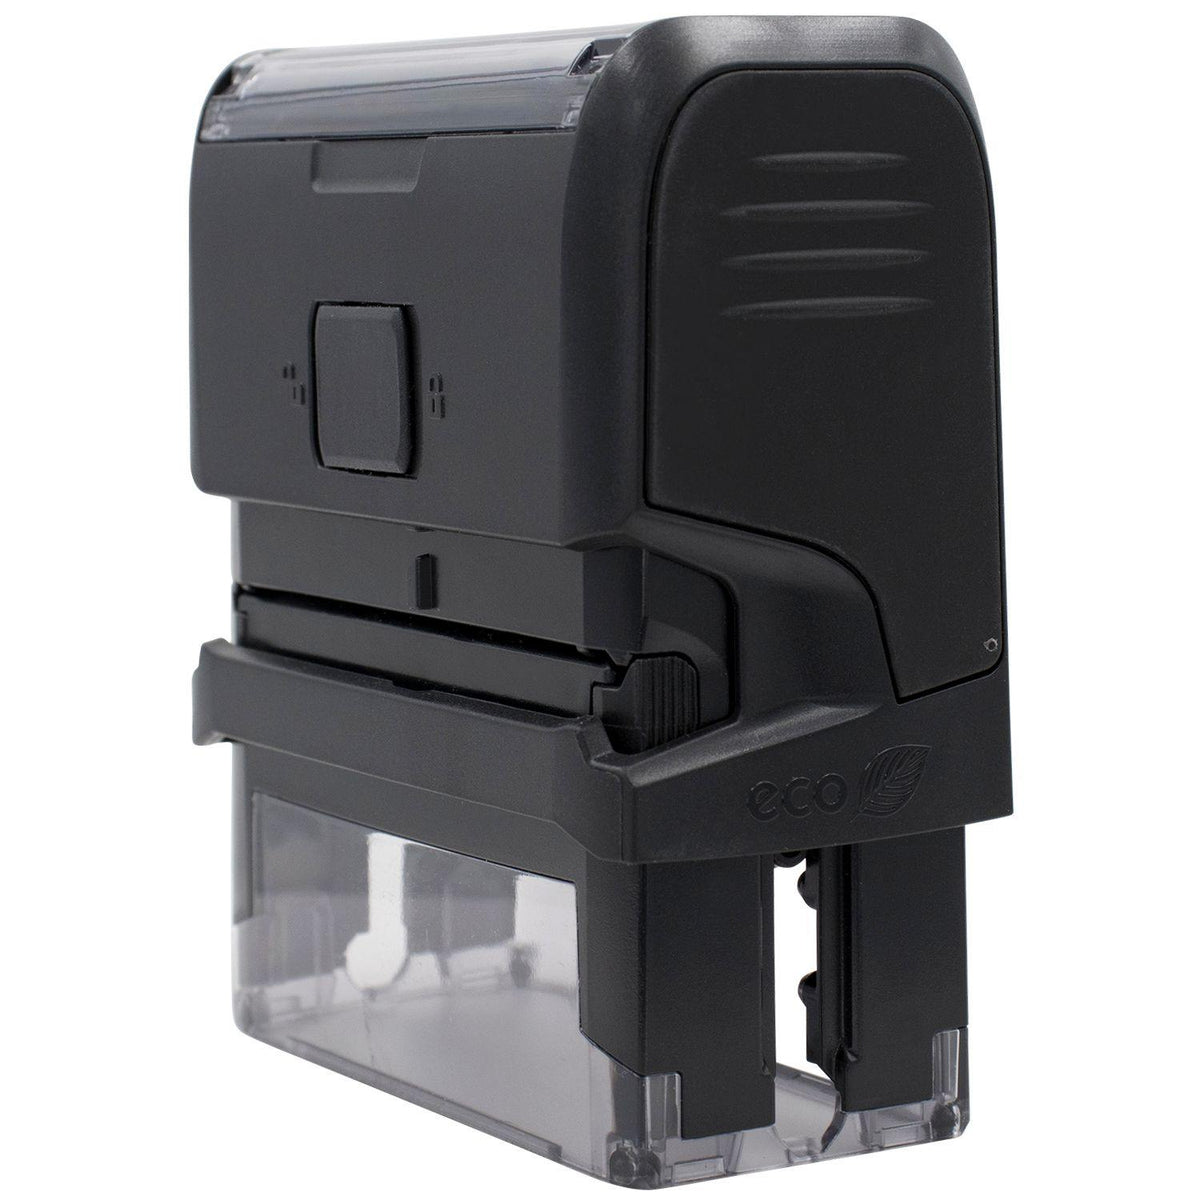 Large Self Inking Will Stamp - Engineer Seal Stamps - Brand_Trodat, Impression Size_Large, Stamp Type_Self-Inking Stamp, Type of Use_Medical Office